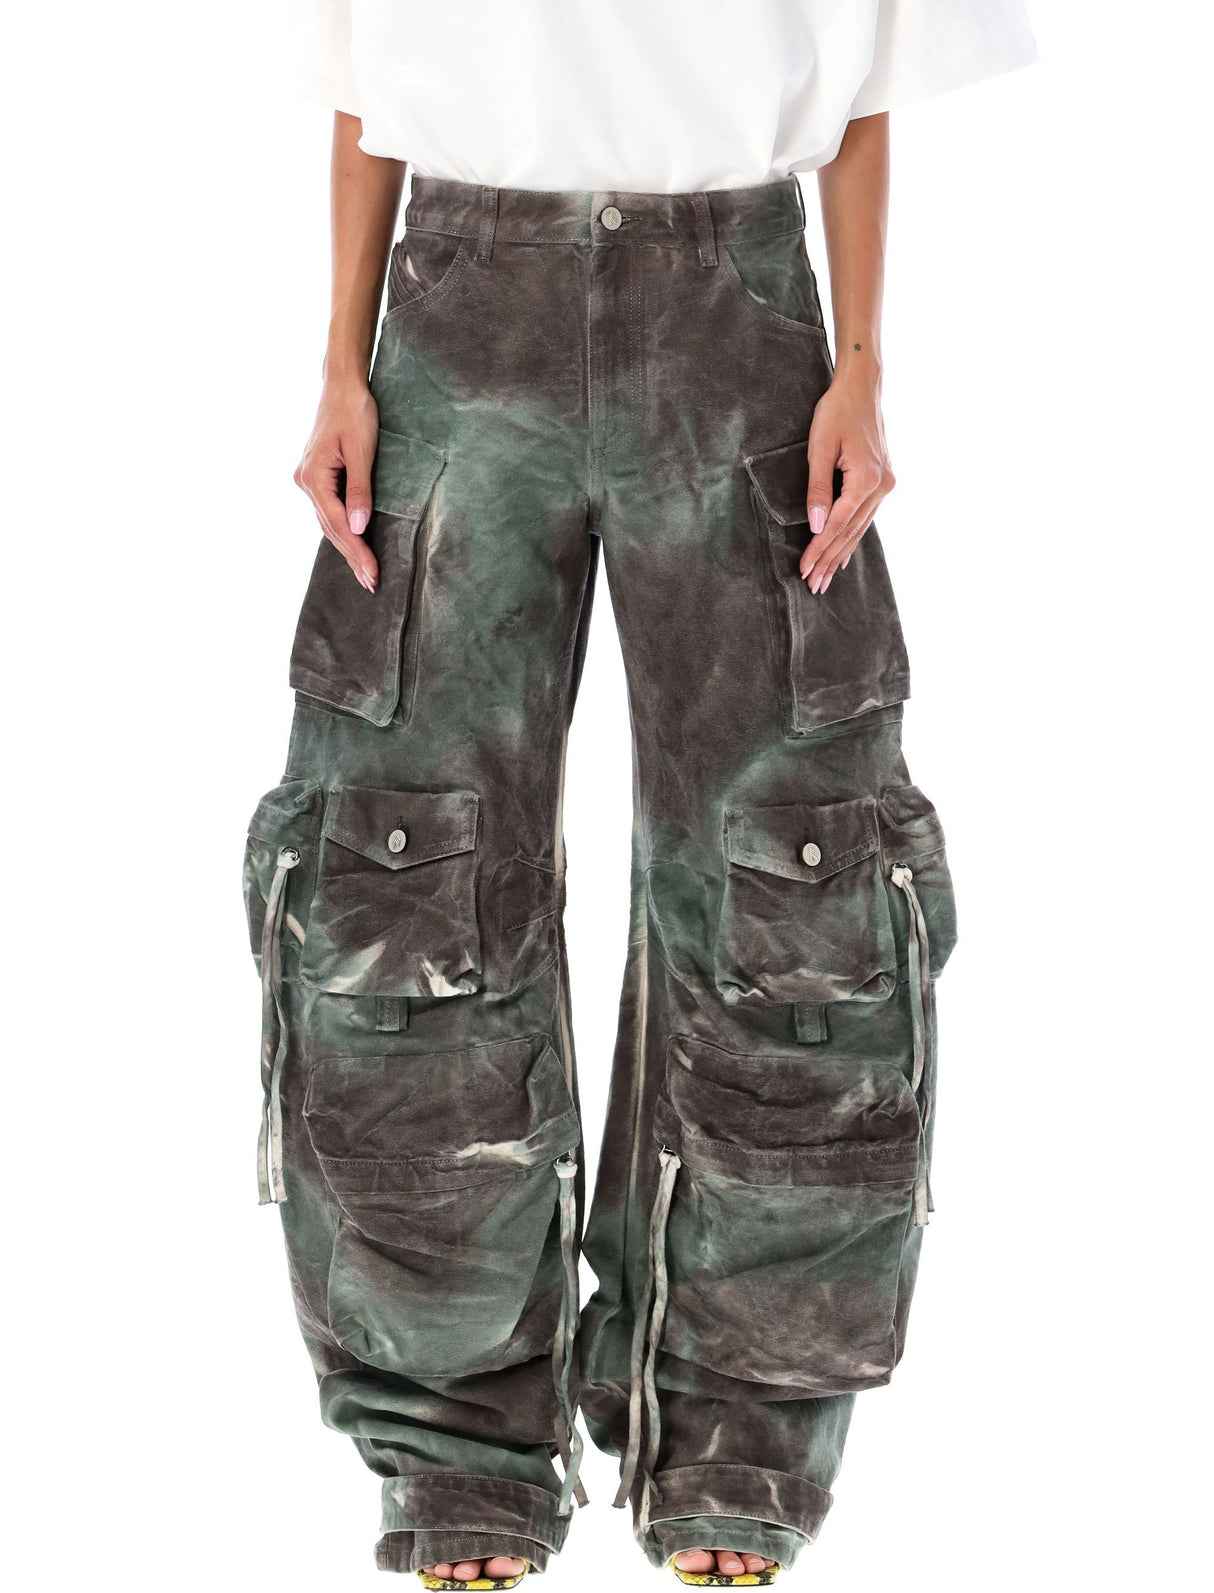 THE ATTICO Stained Green Camouflage Denim Pants with Multiple Cargo Pockets for Women